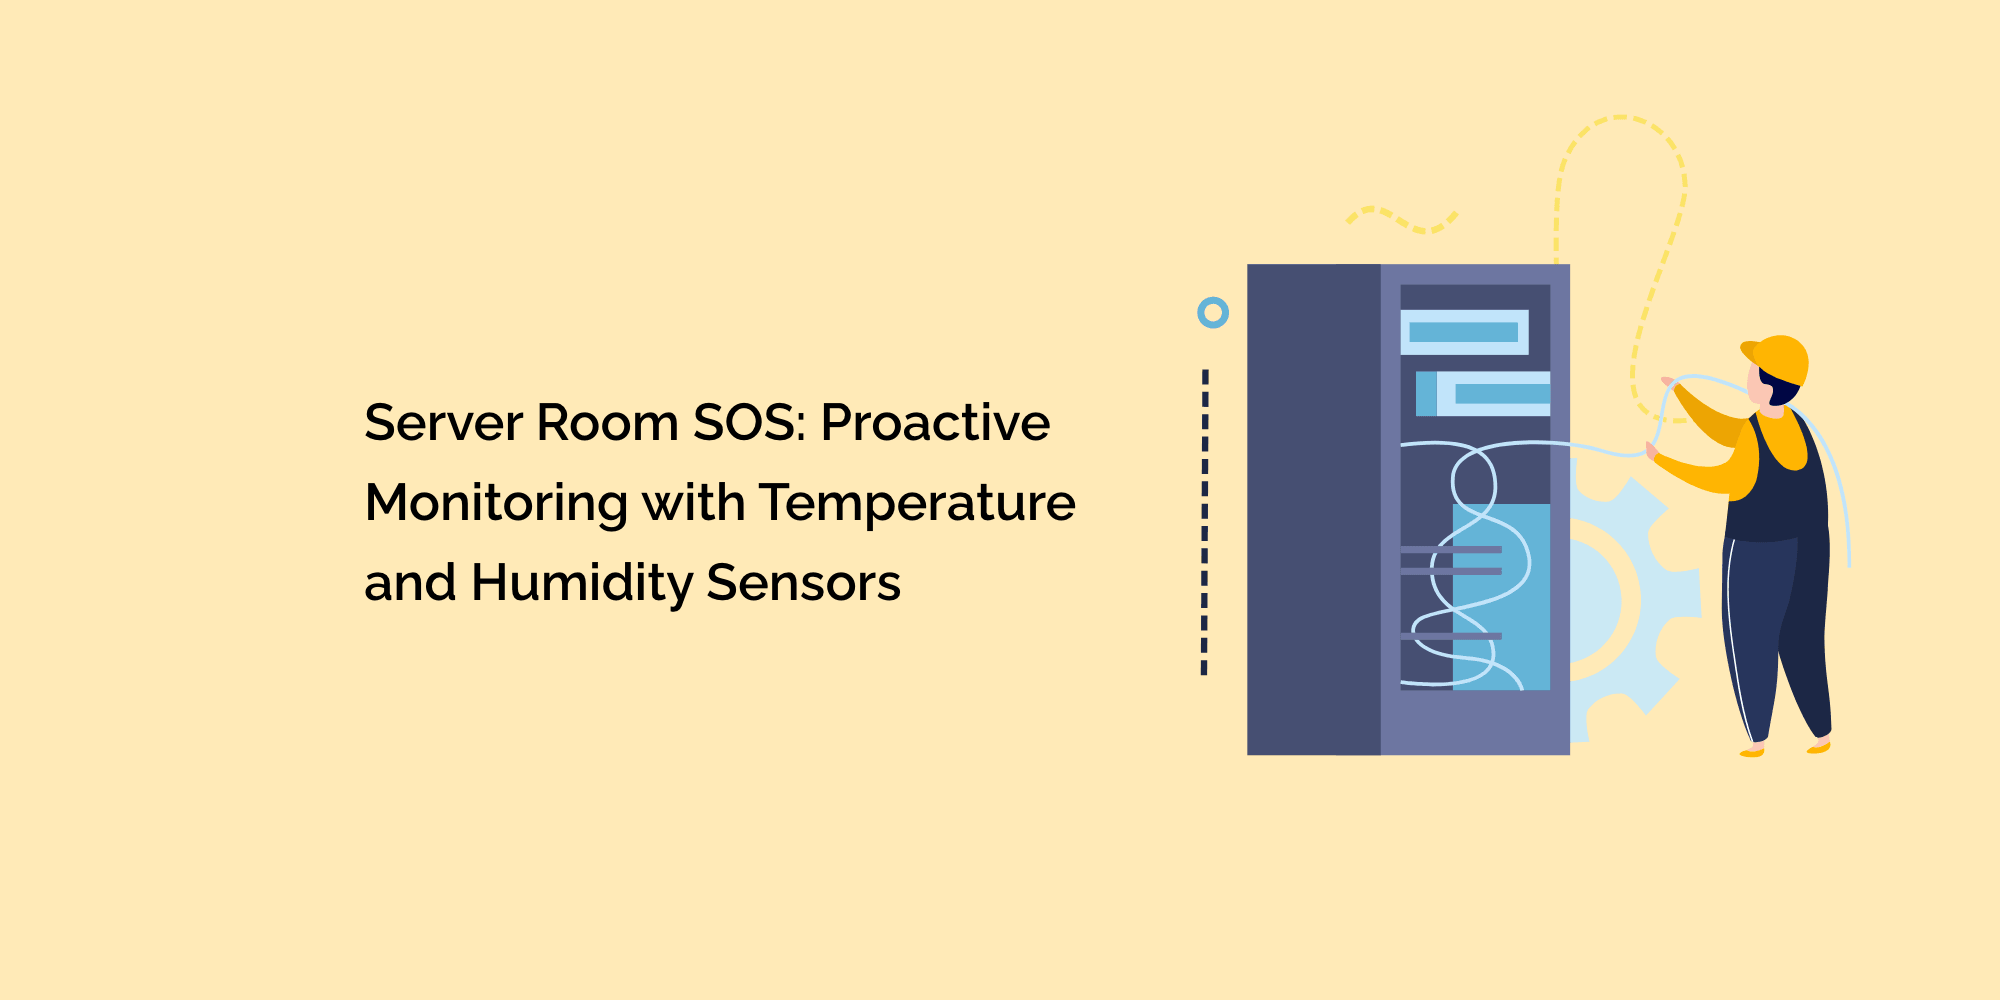 Server Room SOS: Proactive Monitoring with Temperature and Humidity Sensors